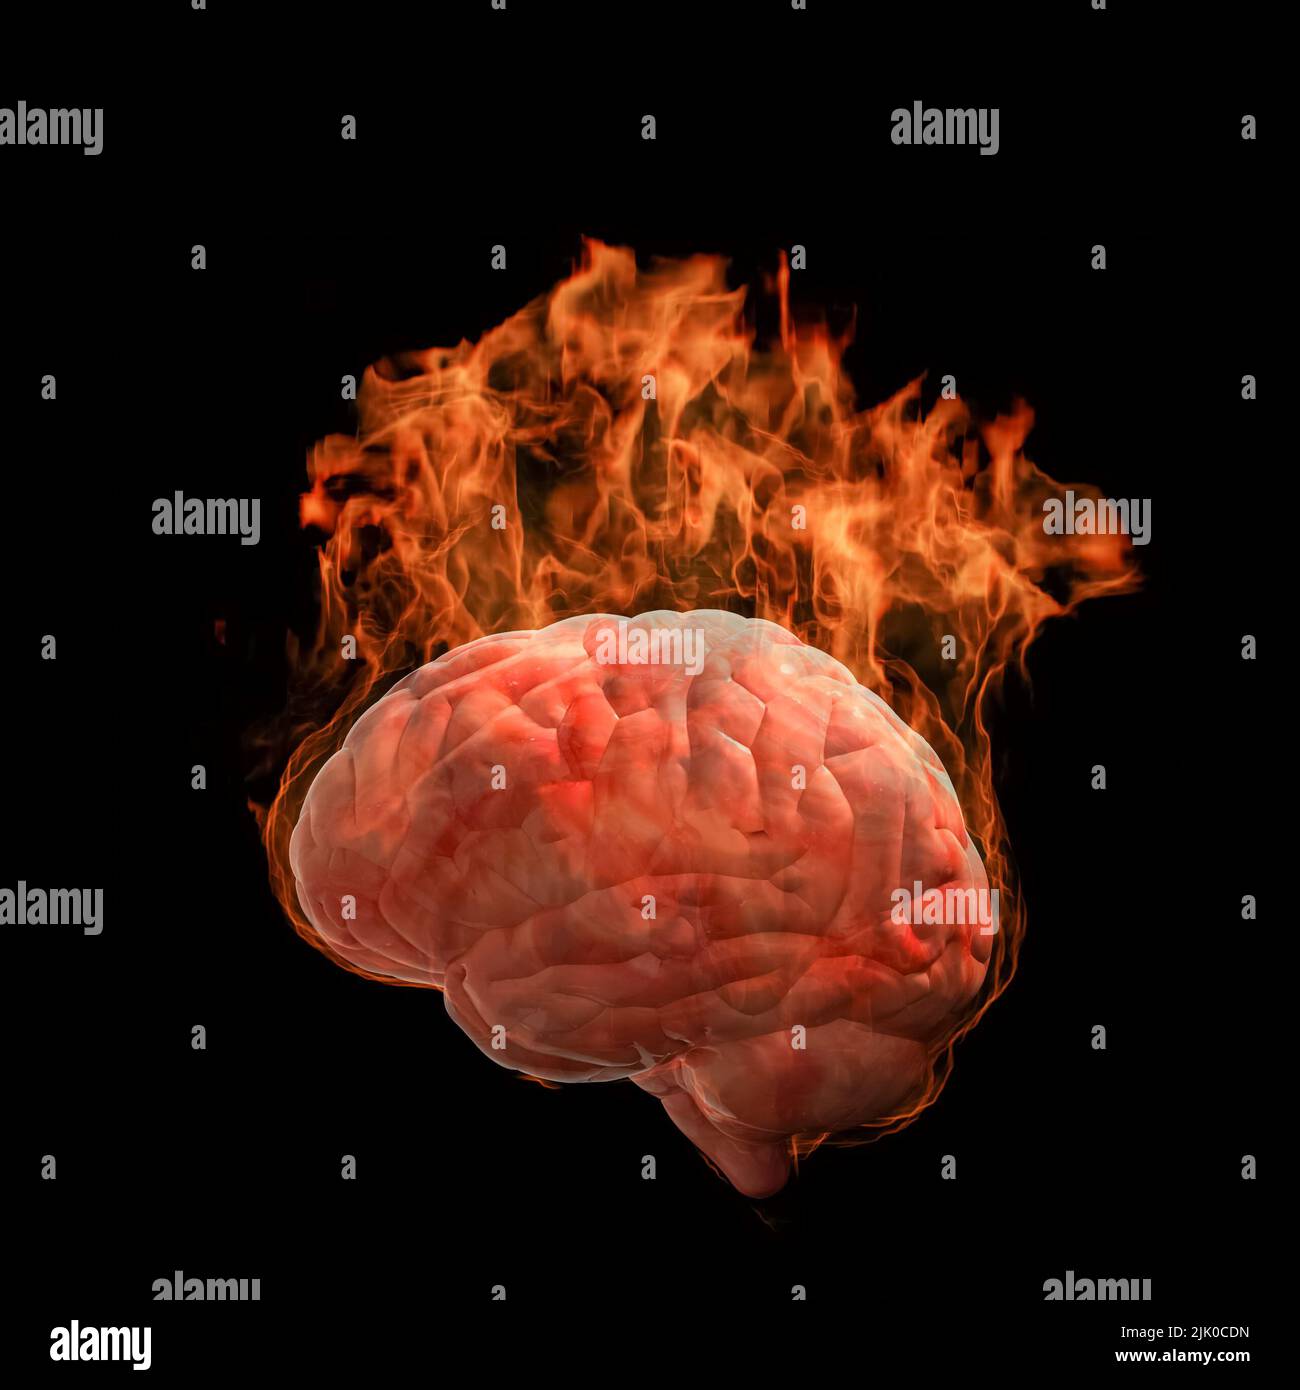 3d Rendering Of A Human Brains Burning On Fire With Hot Flame Stock